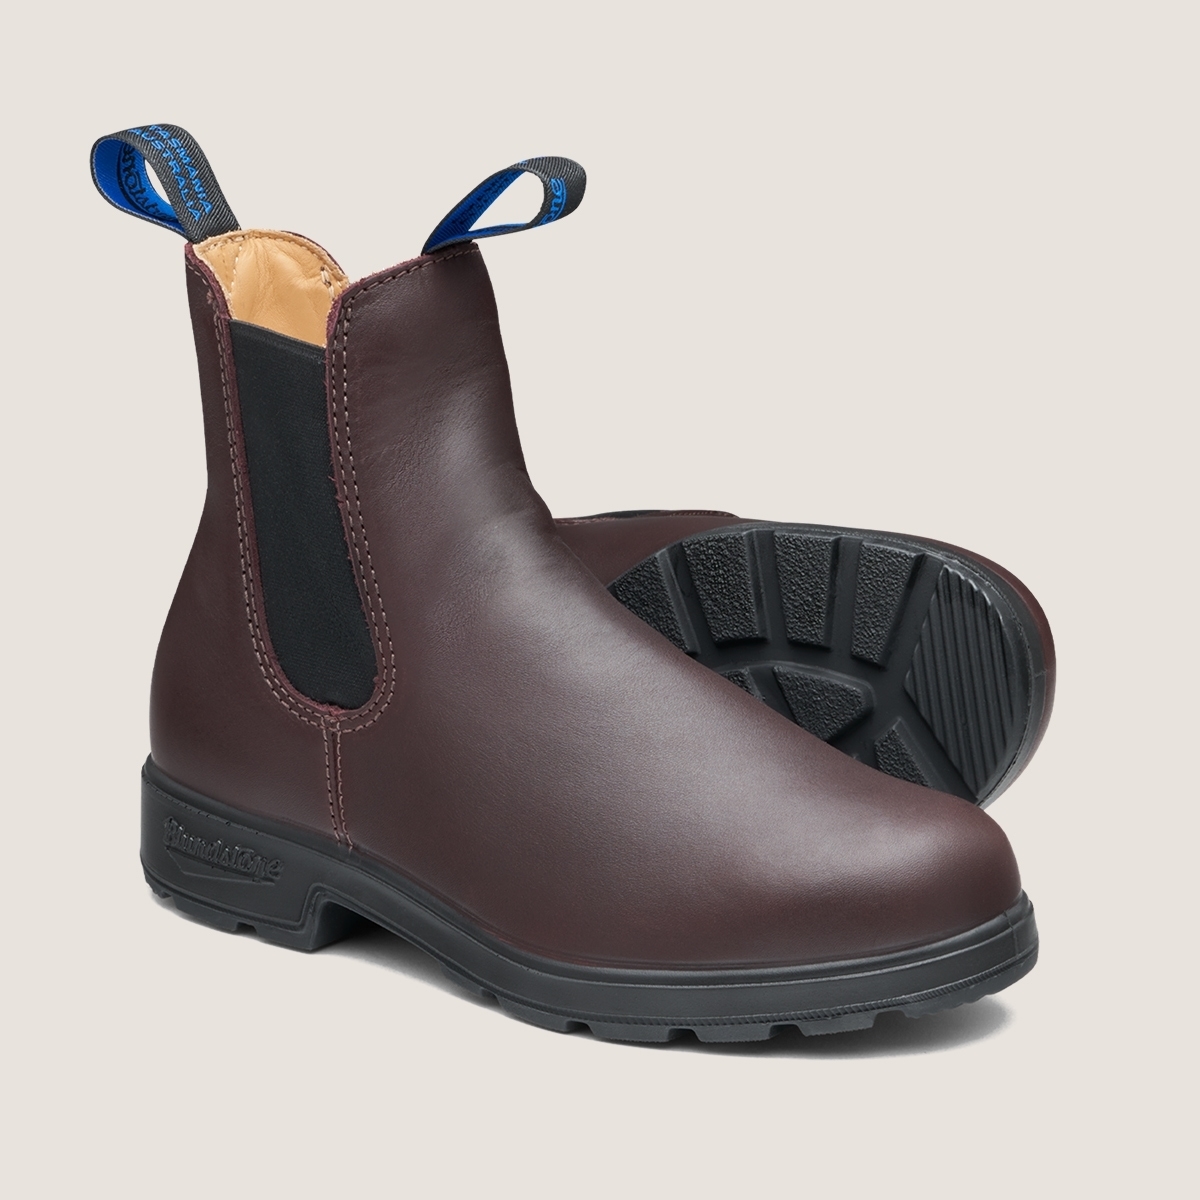 brown Blundstone Chelsea boots with black elastic side panels and pull tabs and